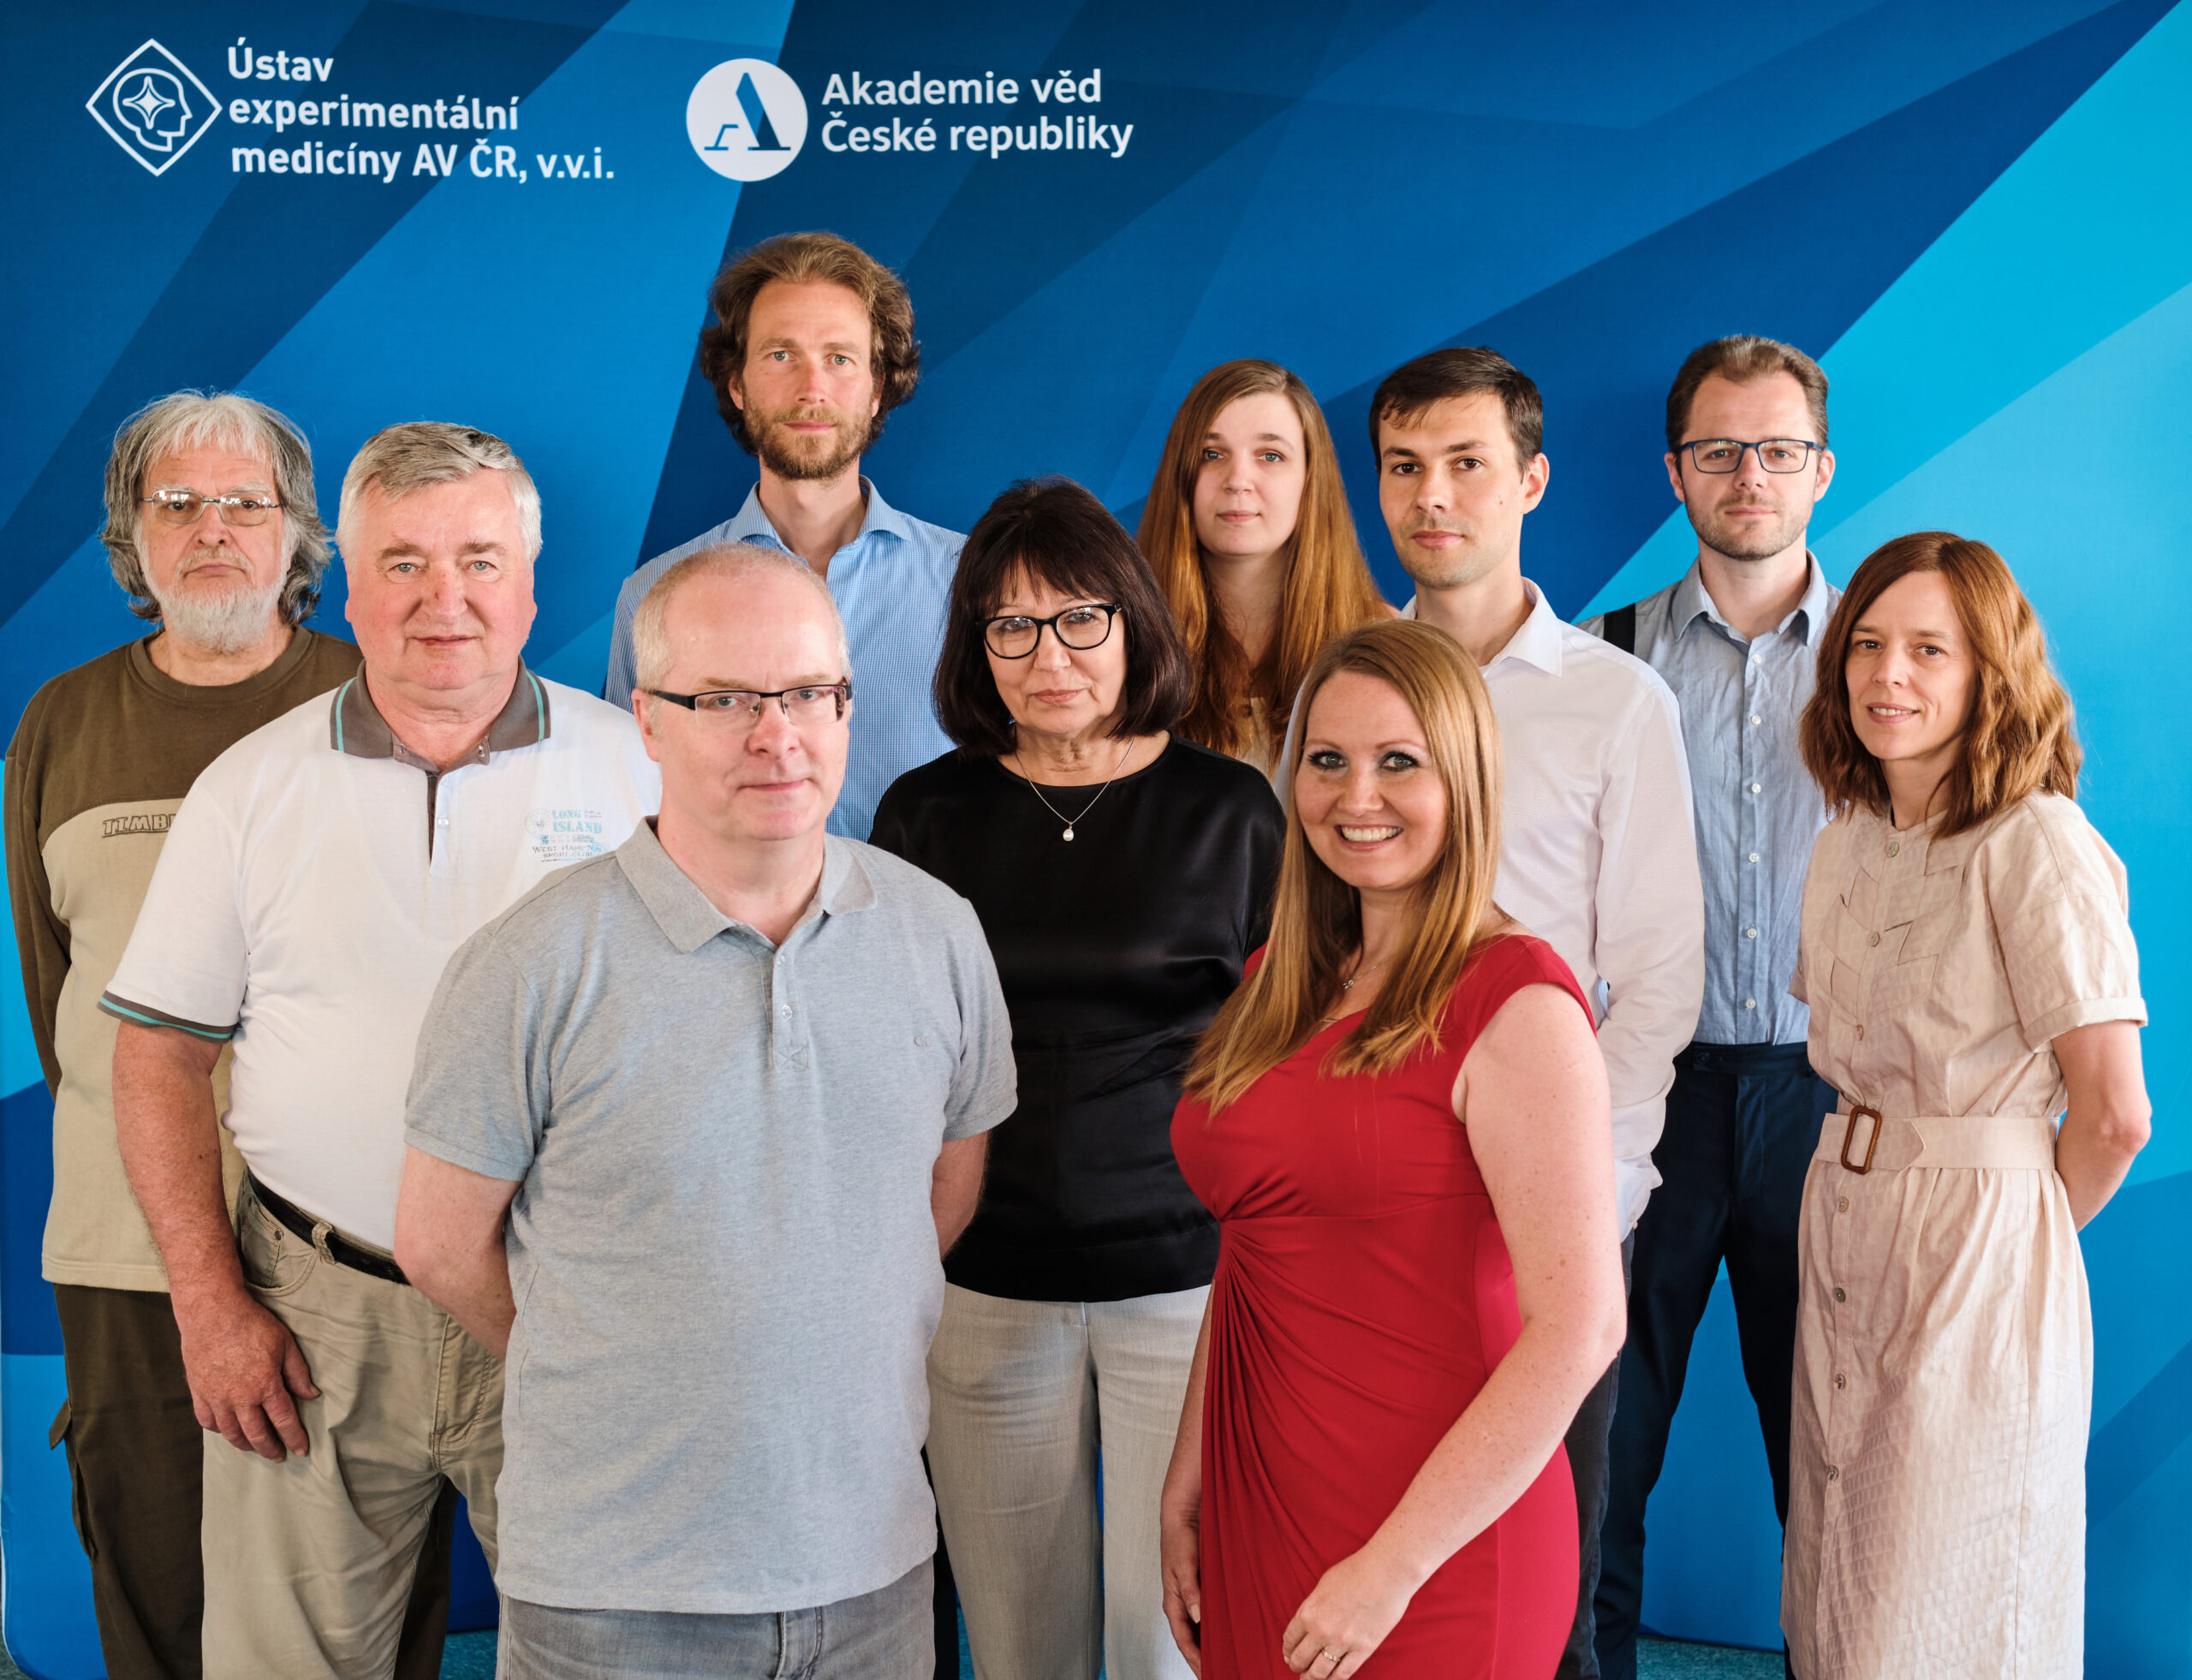 Group photo of the Department of Auditory Neuroscience team